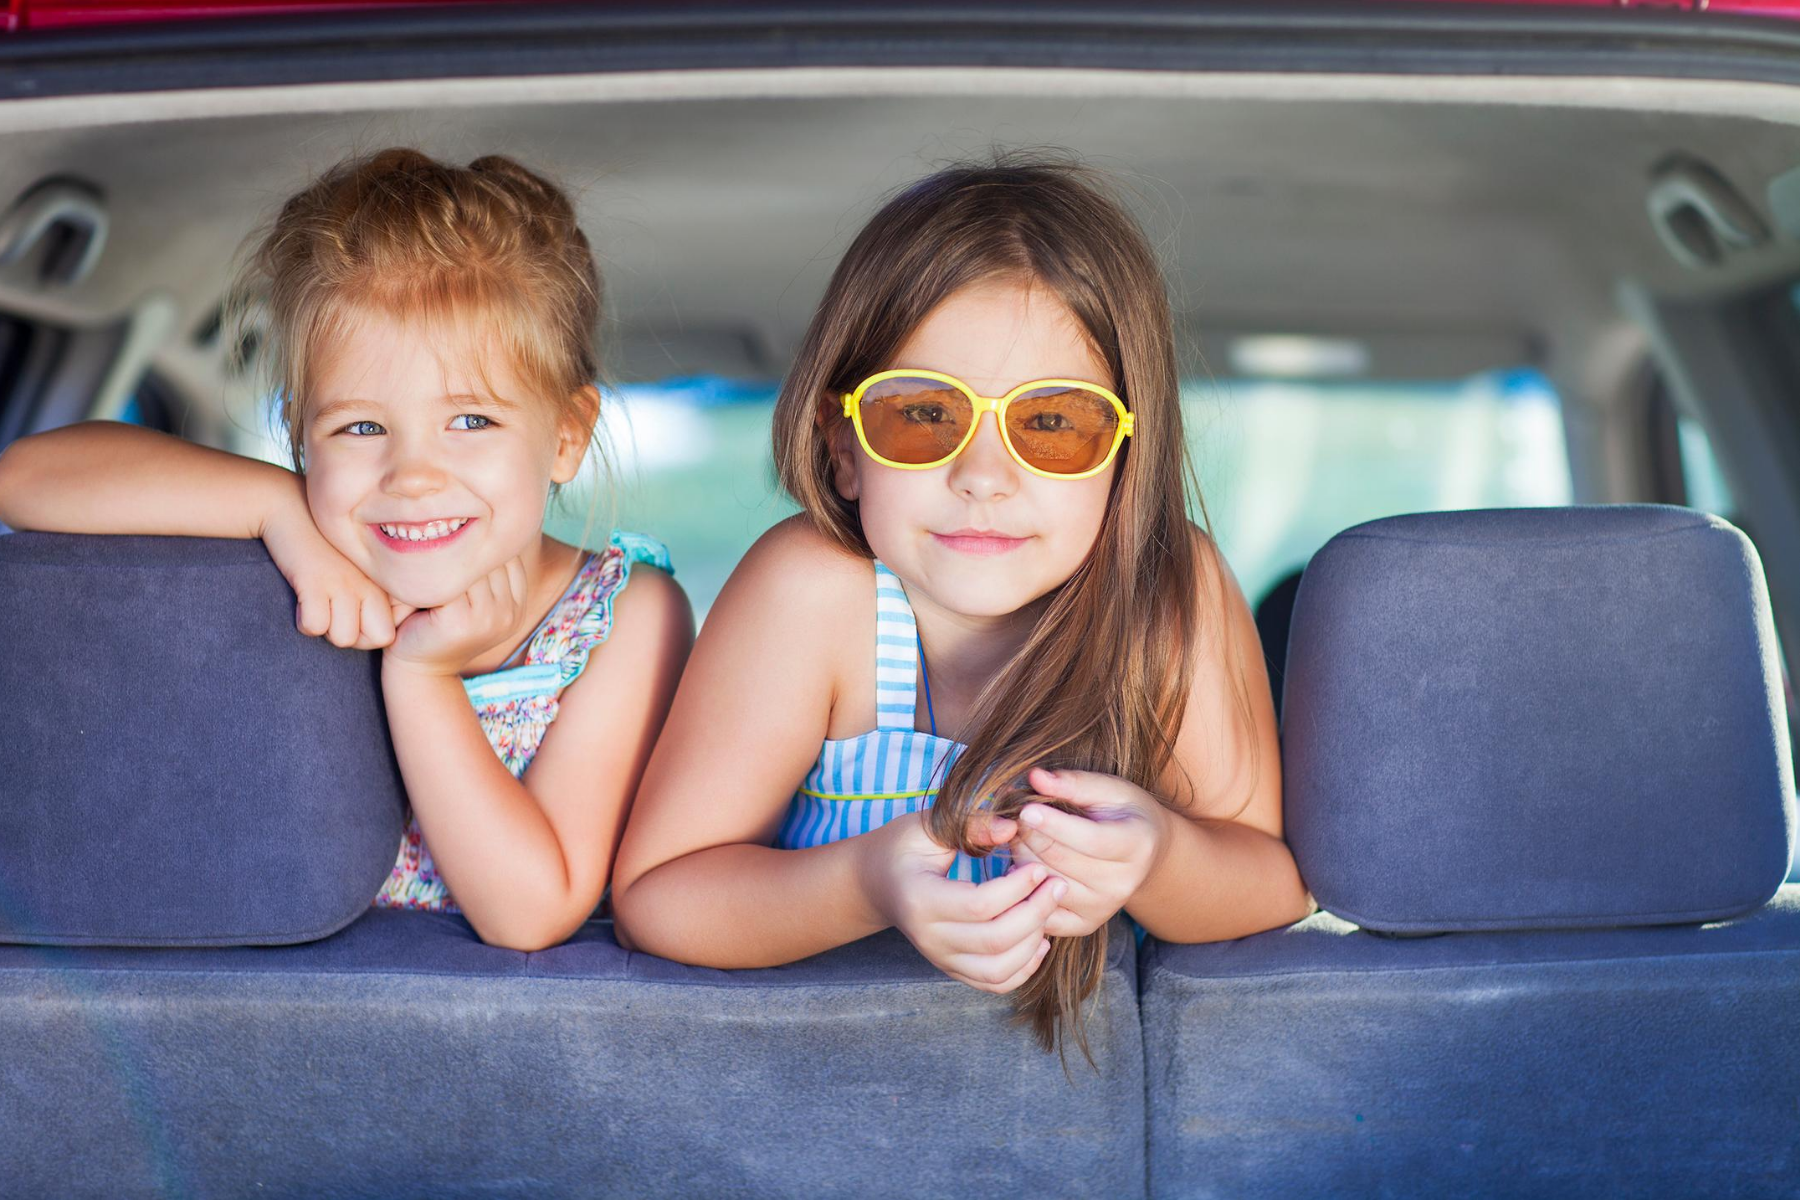 How to Keep My Car Clean with Kids • The Simple Parent